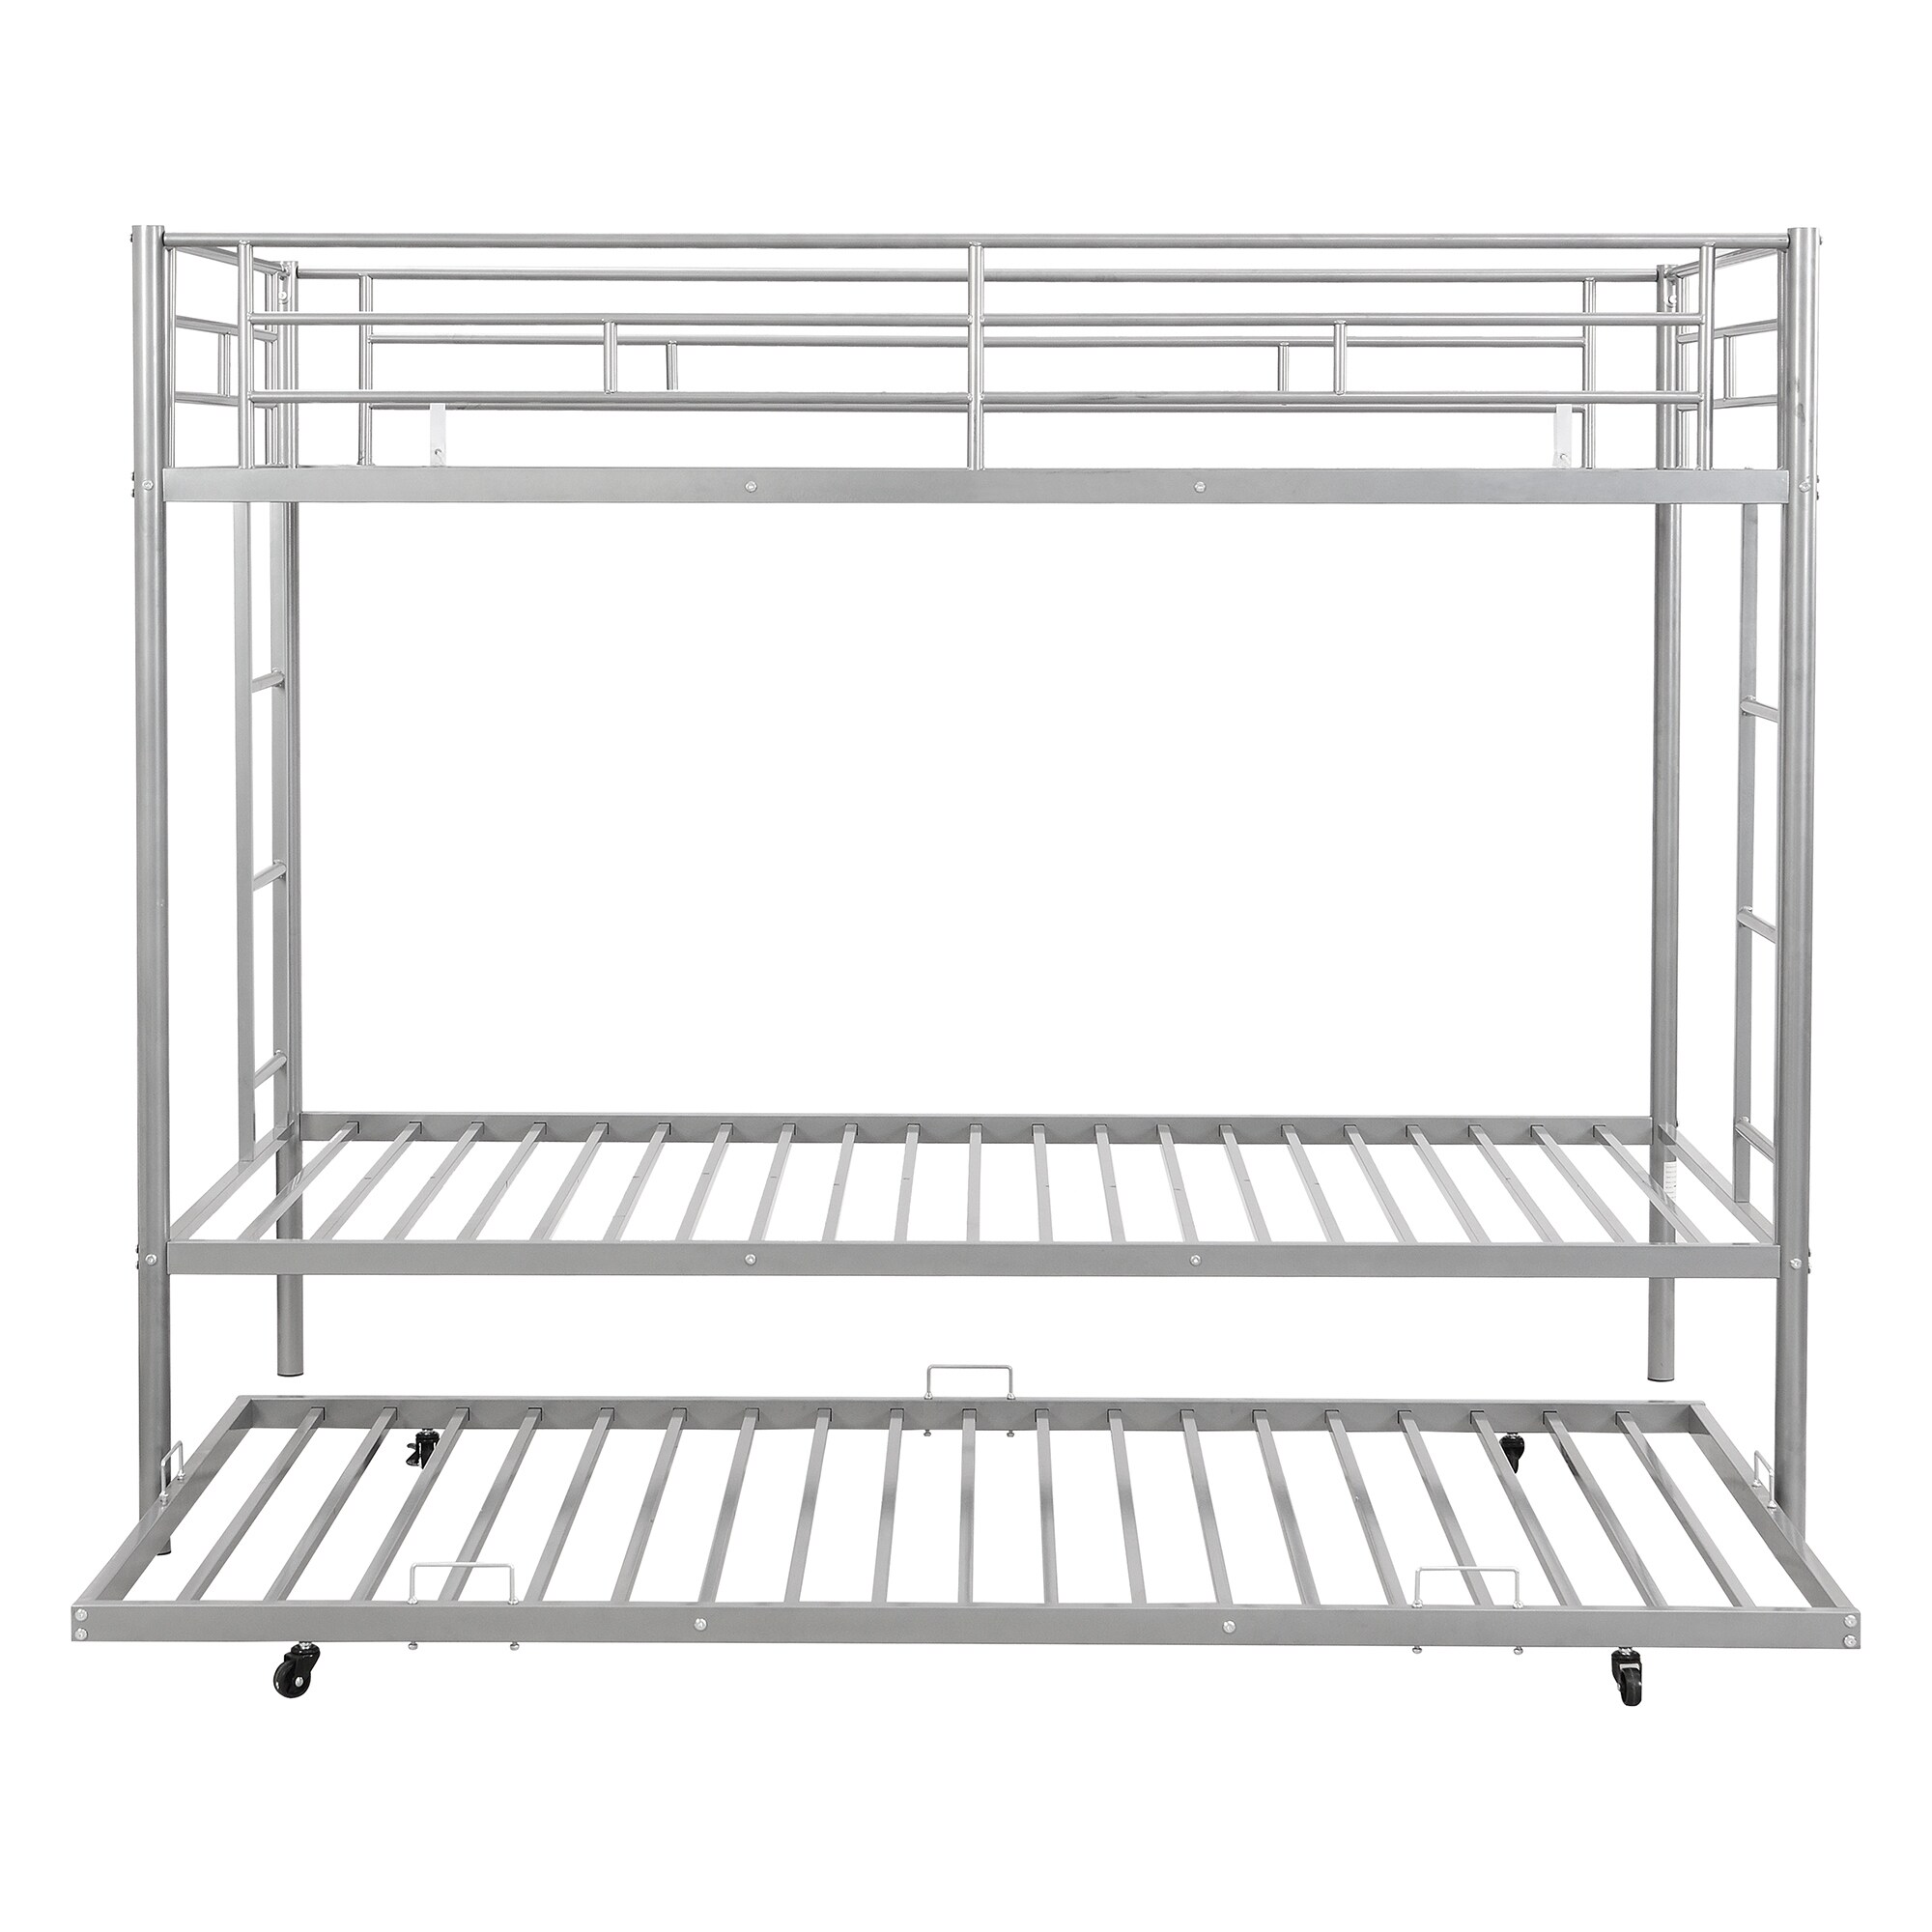 Twin over Twin Bunk Bed with Trundle